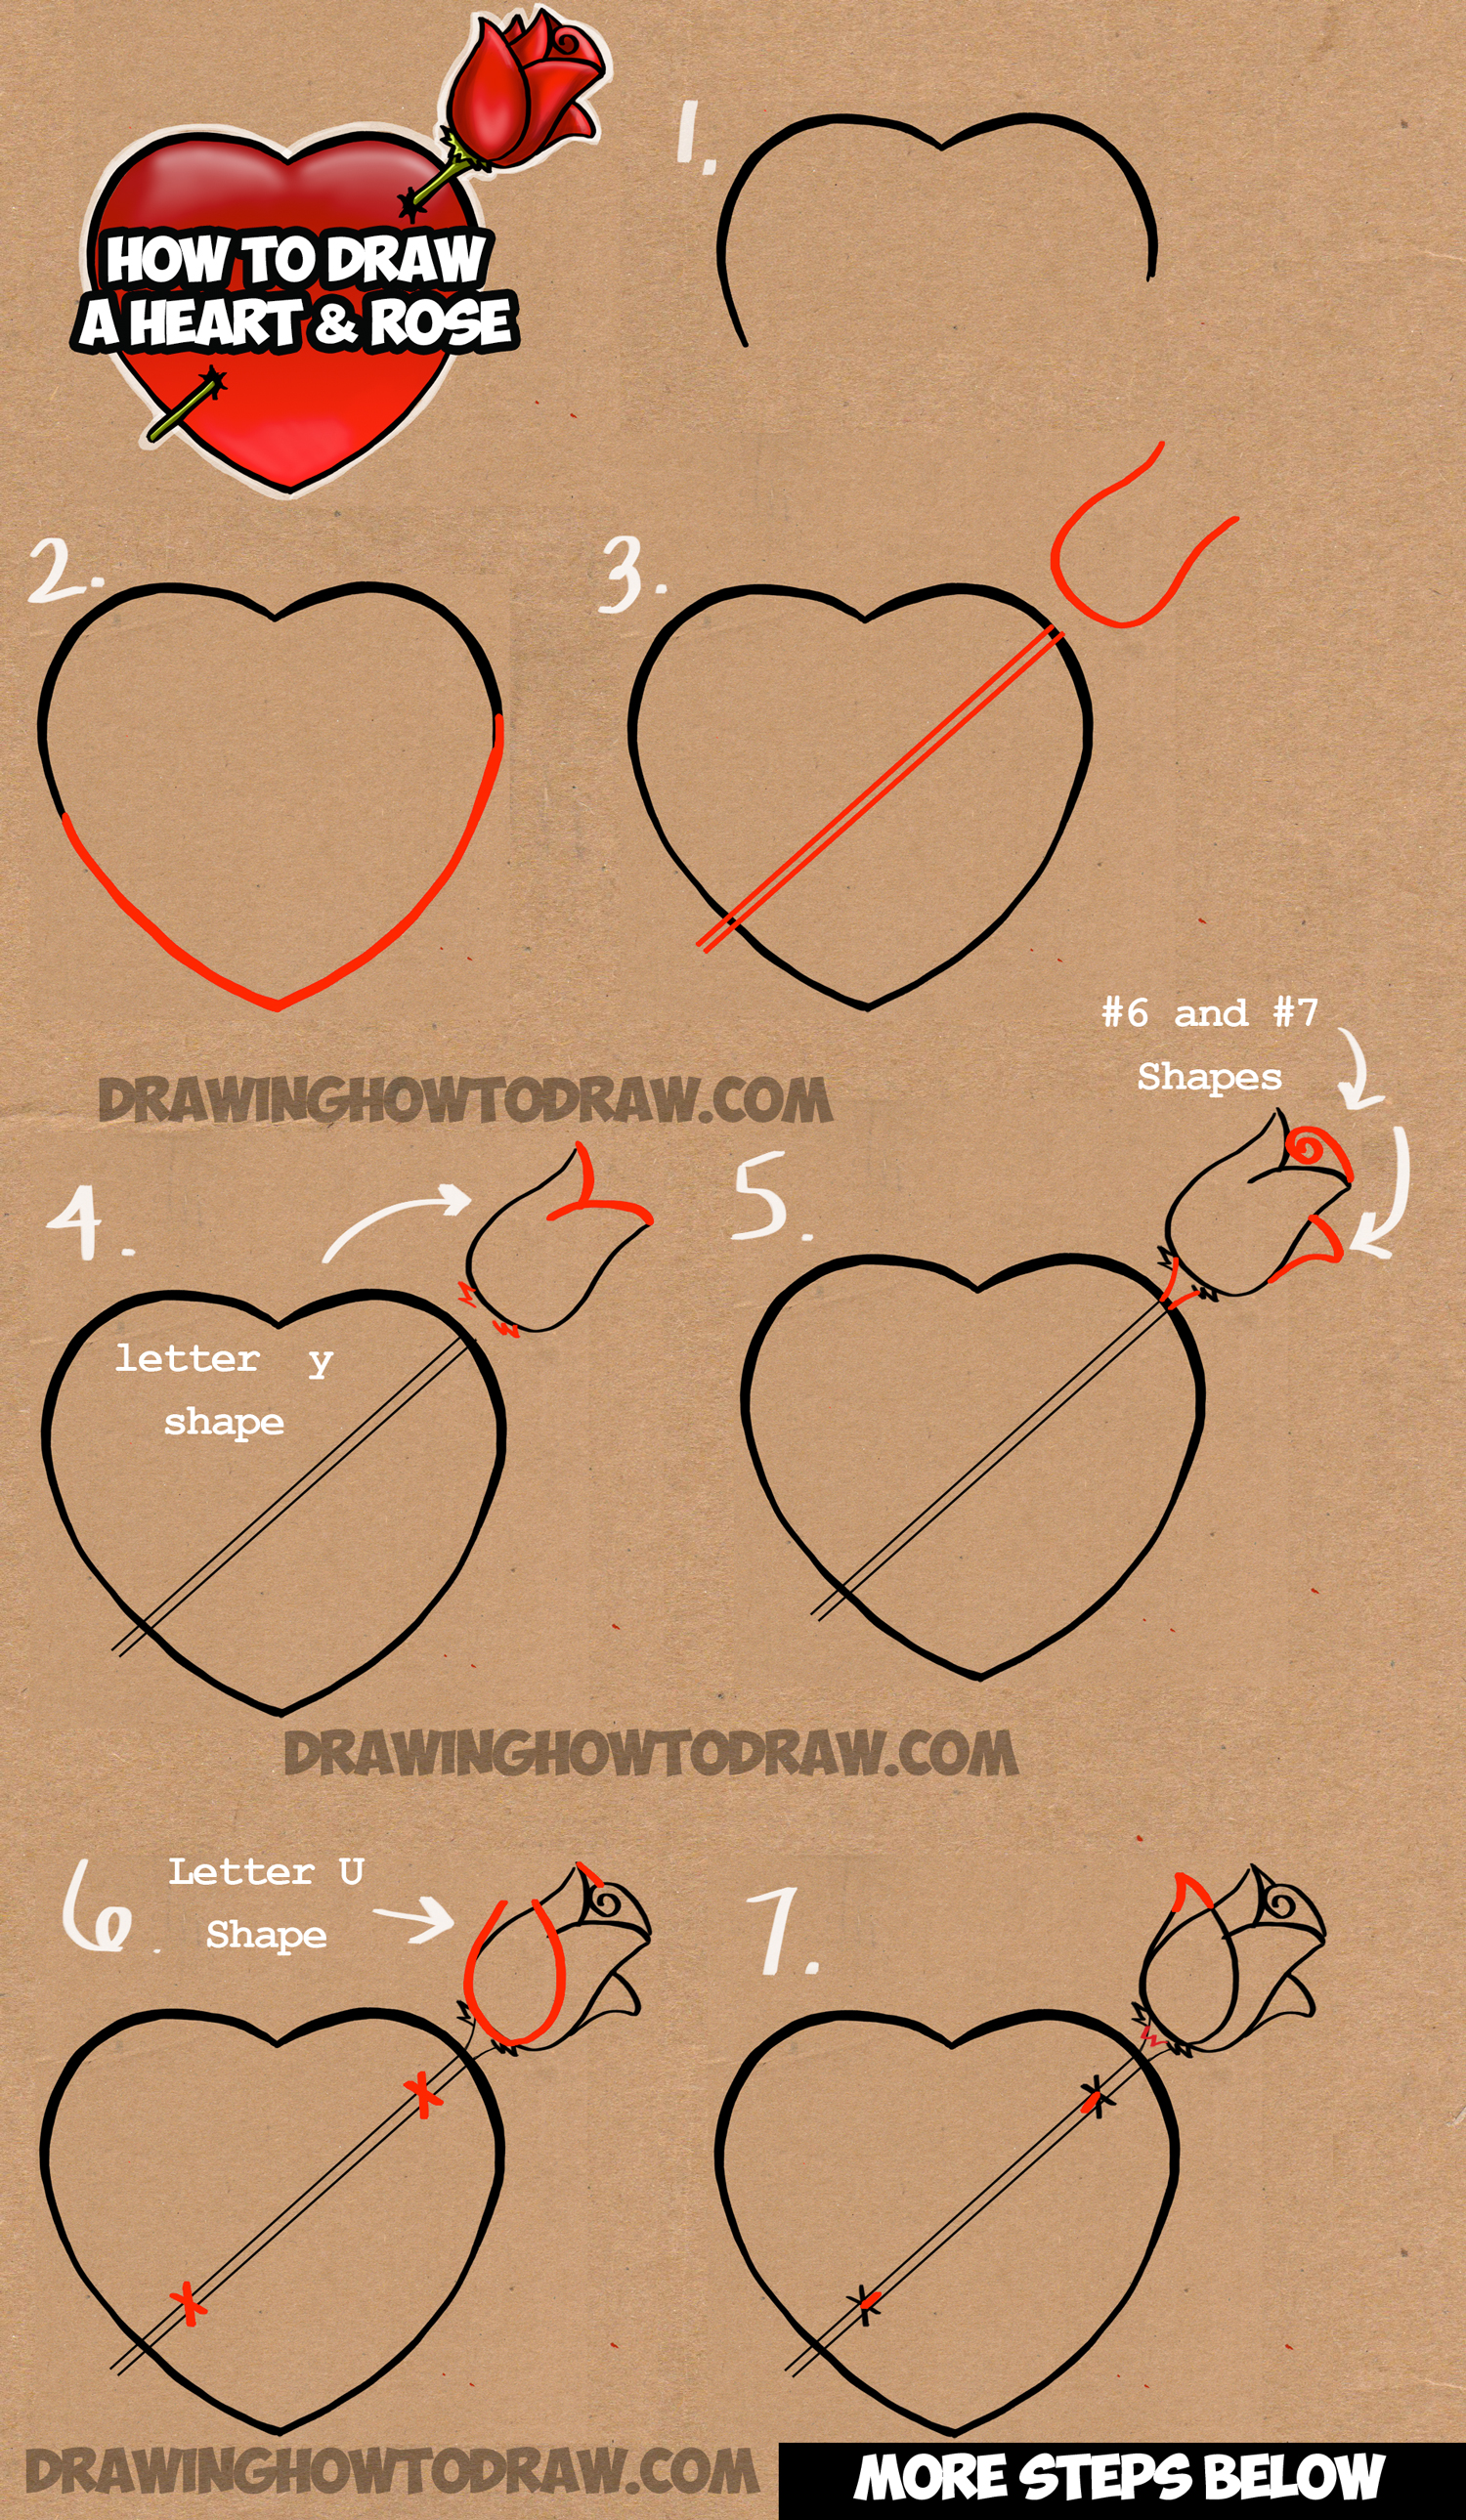 Learn How to Draw a Heart with a Rose - Easy Step by Step Drawing Tutorial